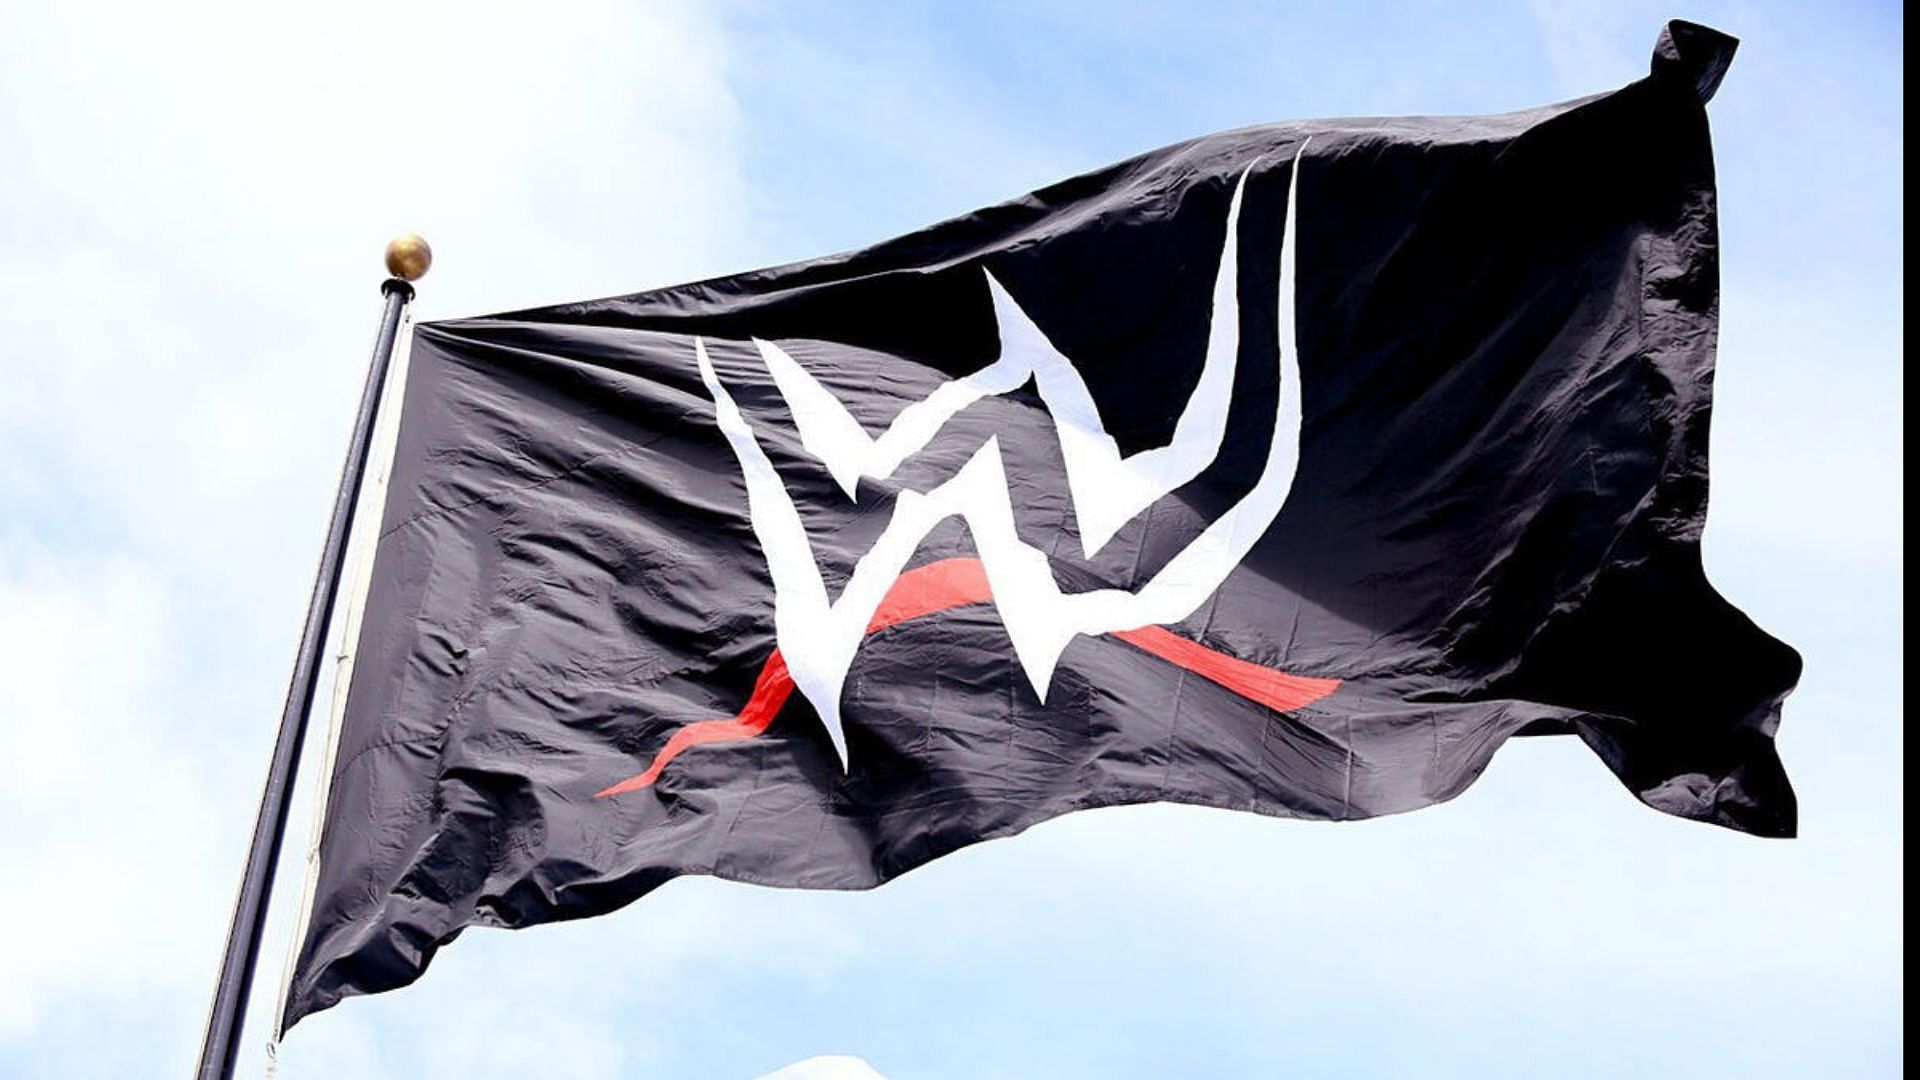 WWE is a Stamford-based wrestling promotion at the top of the industry today [Photo courtesy of WWE